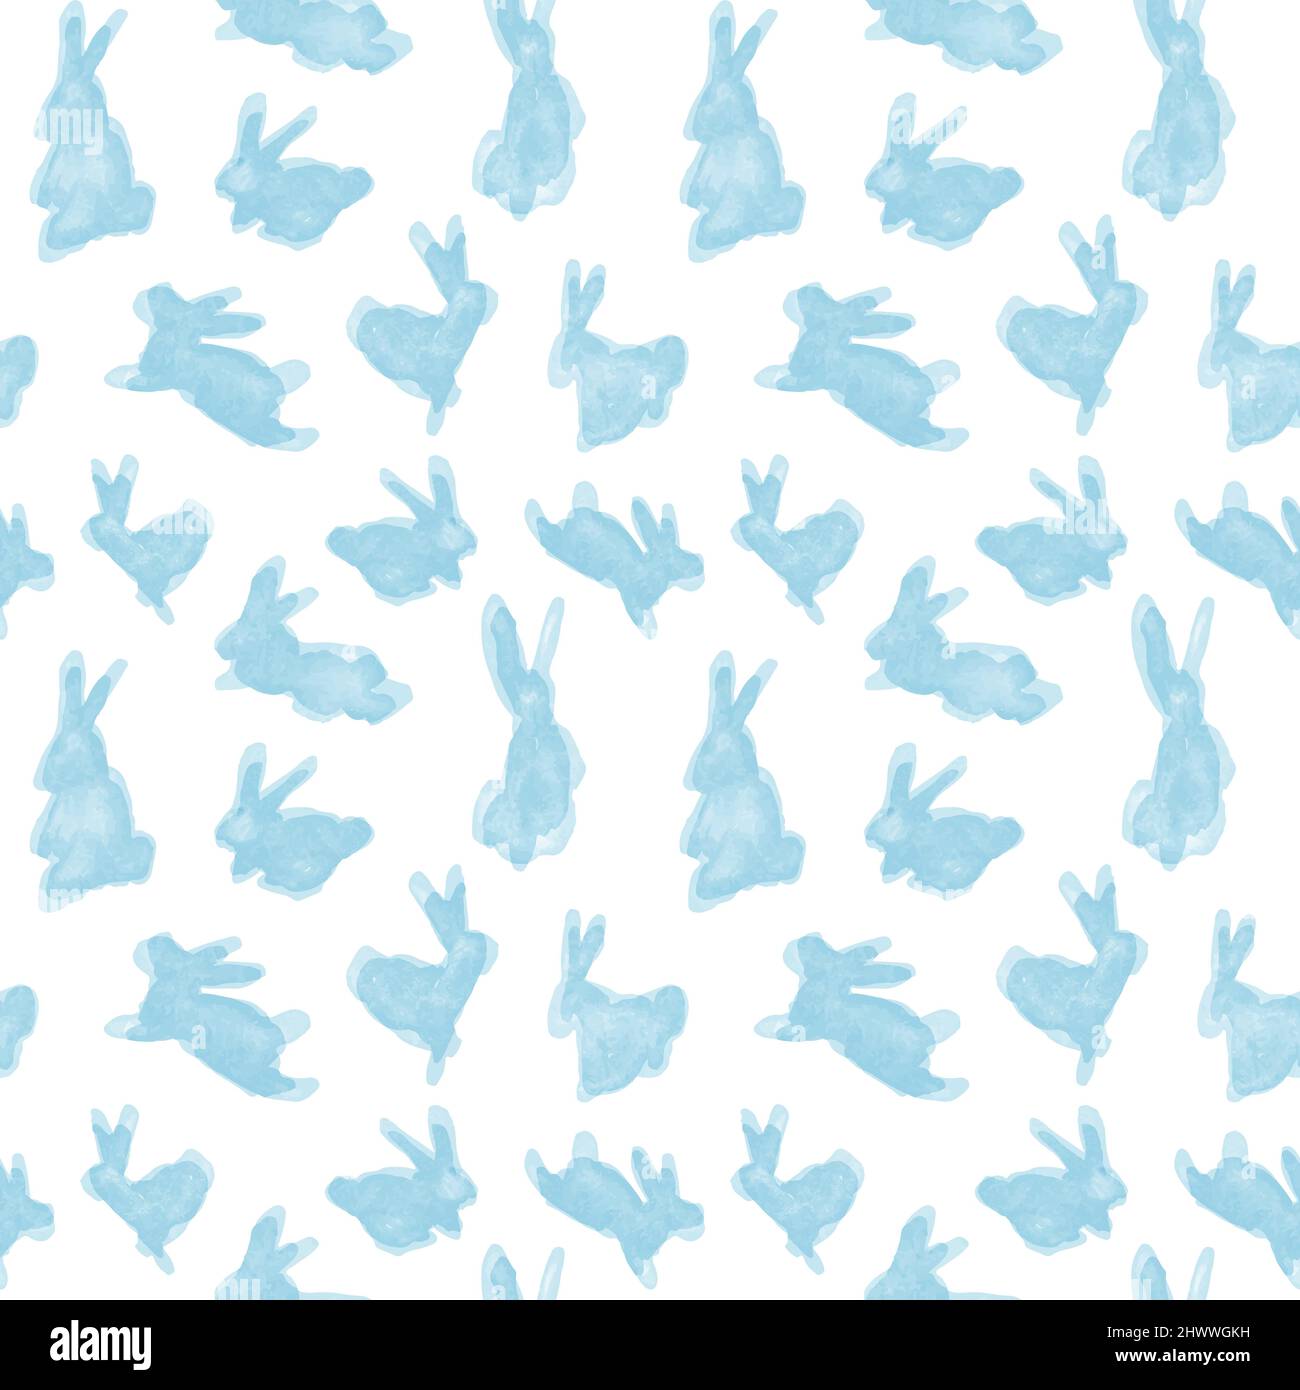 Easter rabbit seamless pattern illustration. Cute blue color bunny animal background in watercolor art style for spring holiday. Stock Vector